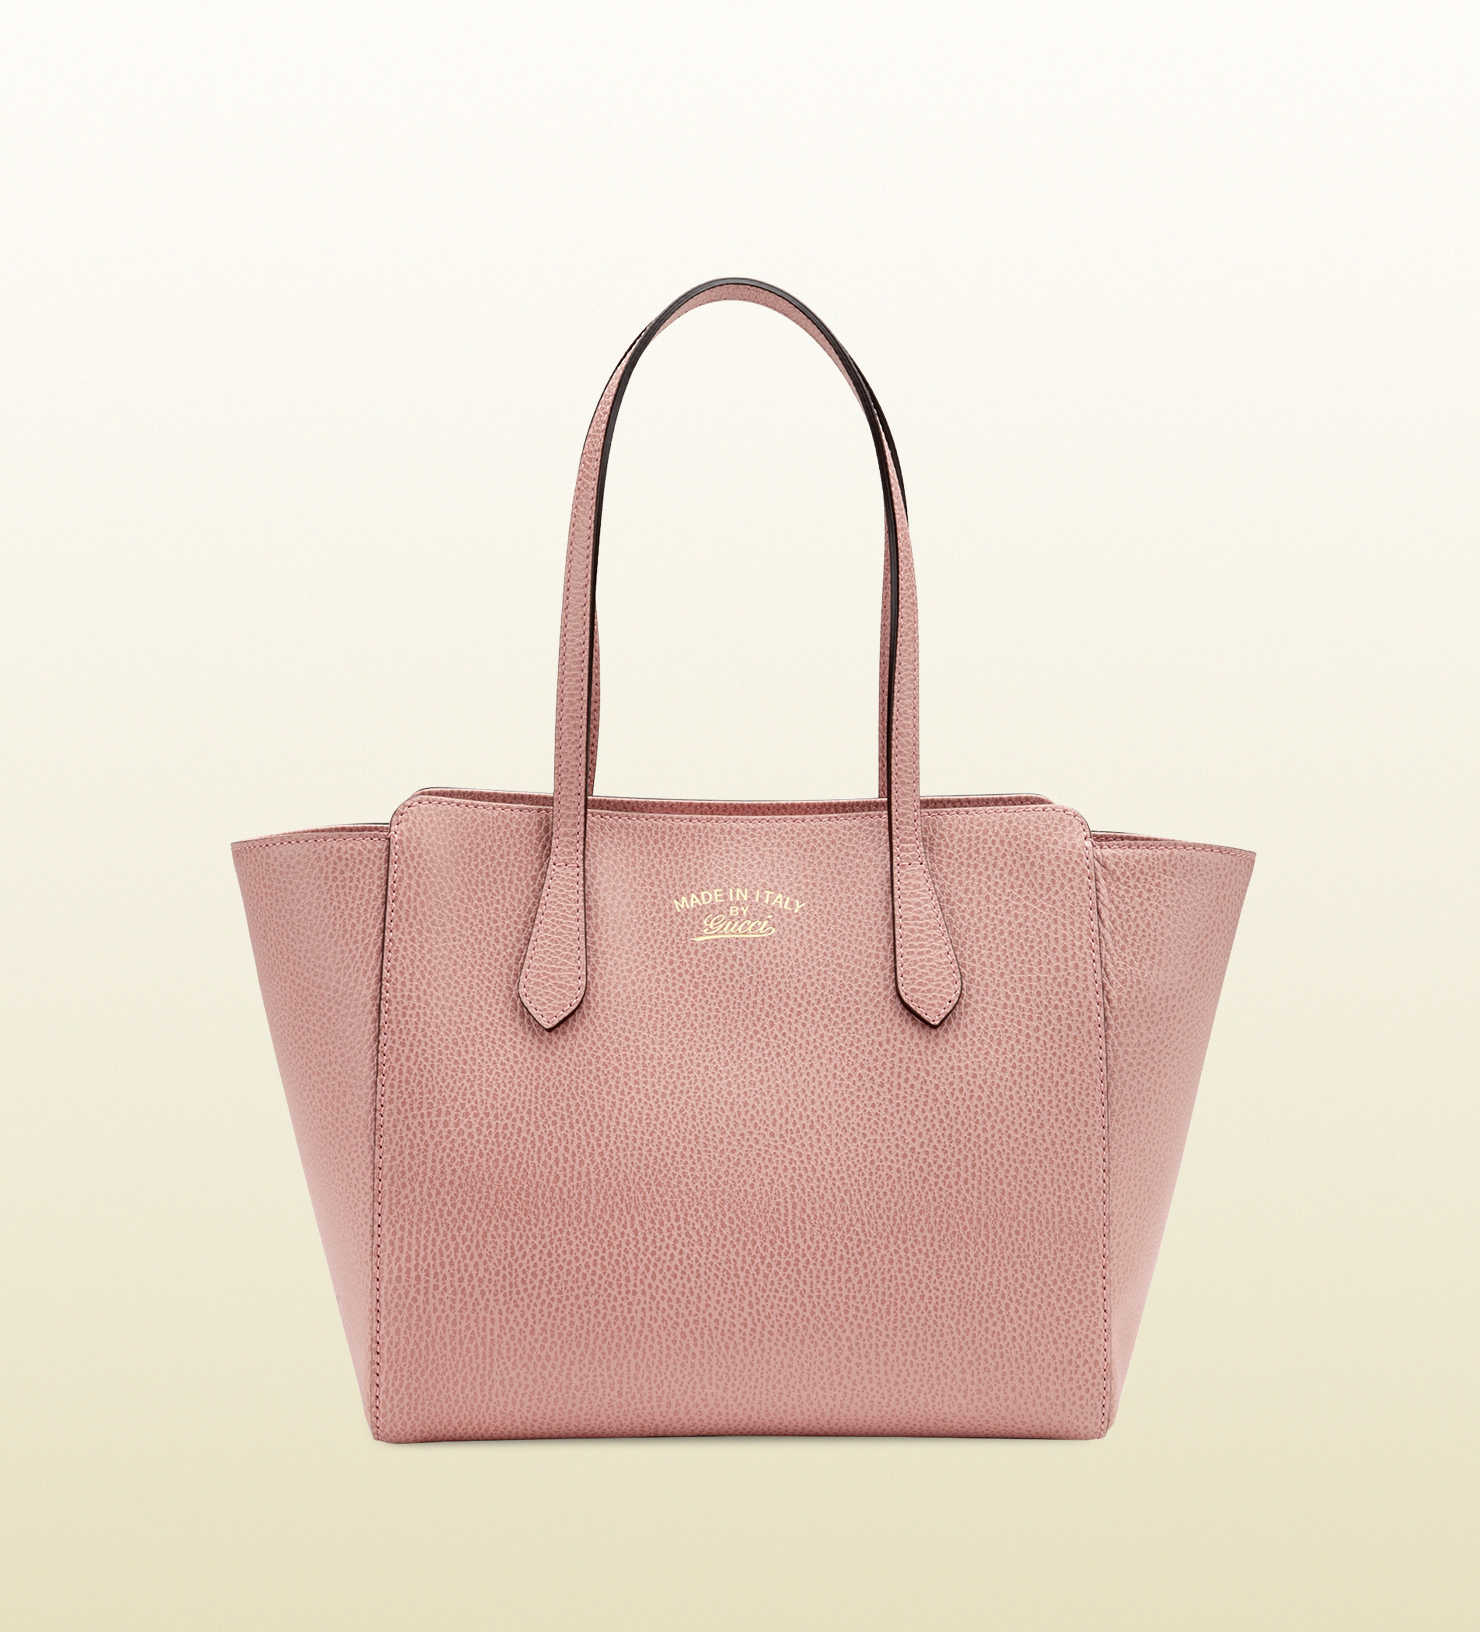 Lyst iGuccii Swing Leather iTotei in Pink